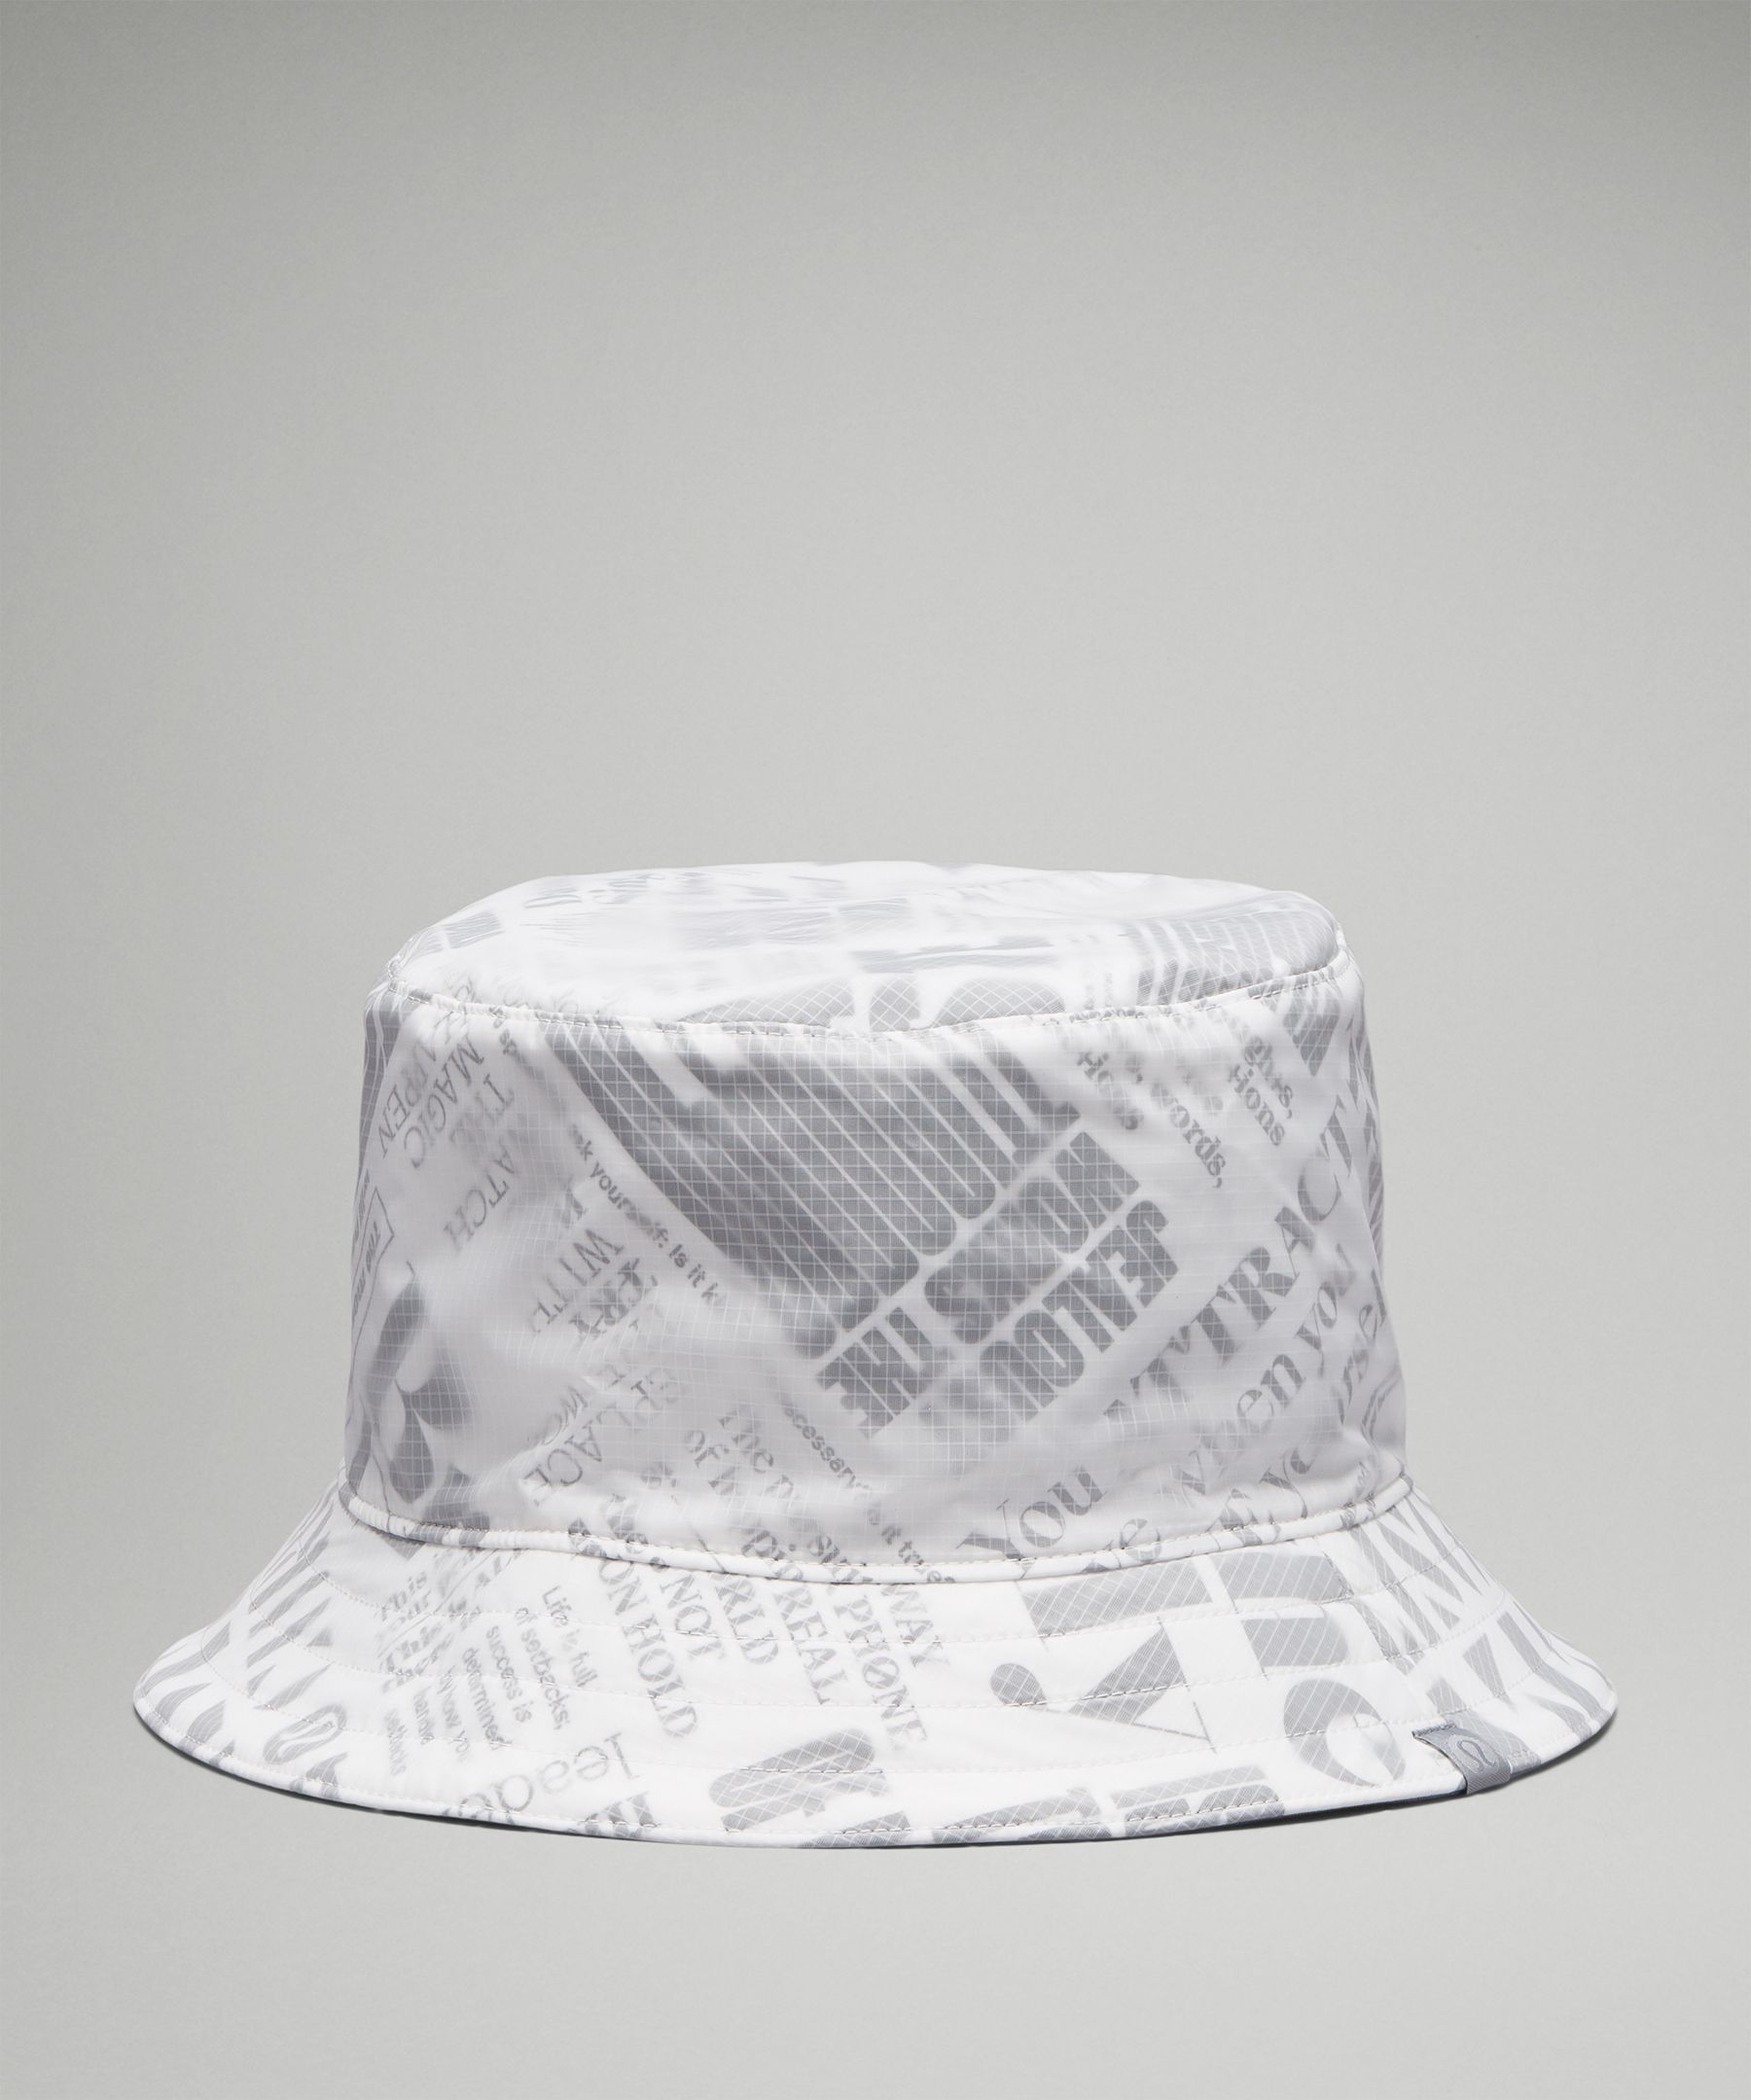 NWT Lululemon Both Ways Reversible Bucket Hat Cap Size L/XL Water Drop  Unisex : Buy Online in the UAE, Price from 244 EAD & Shipping to Dubai